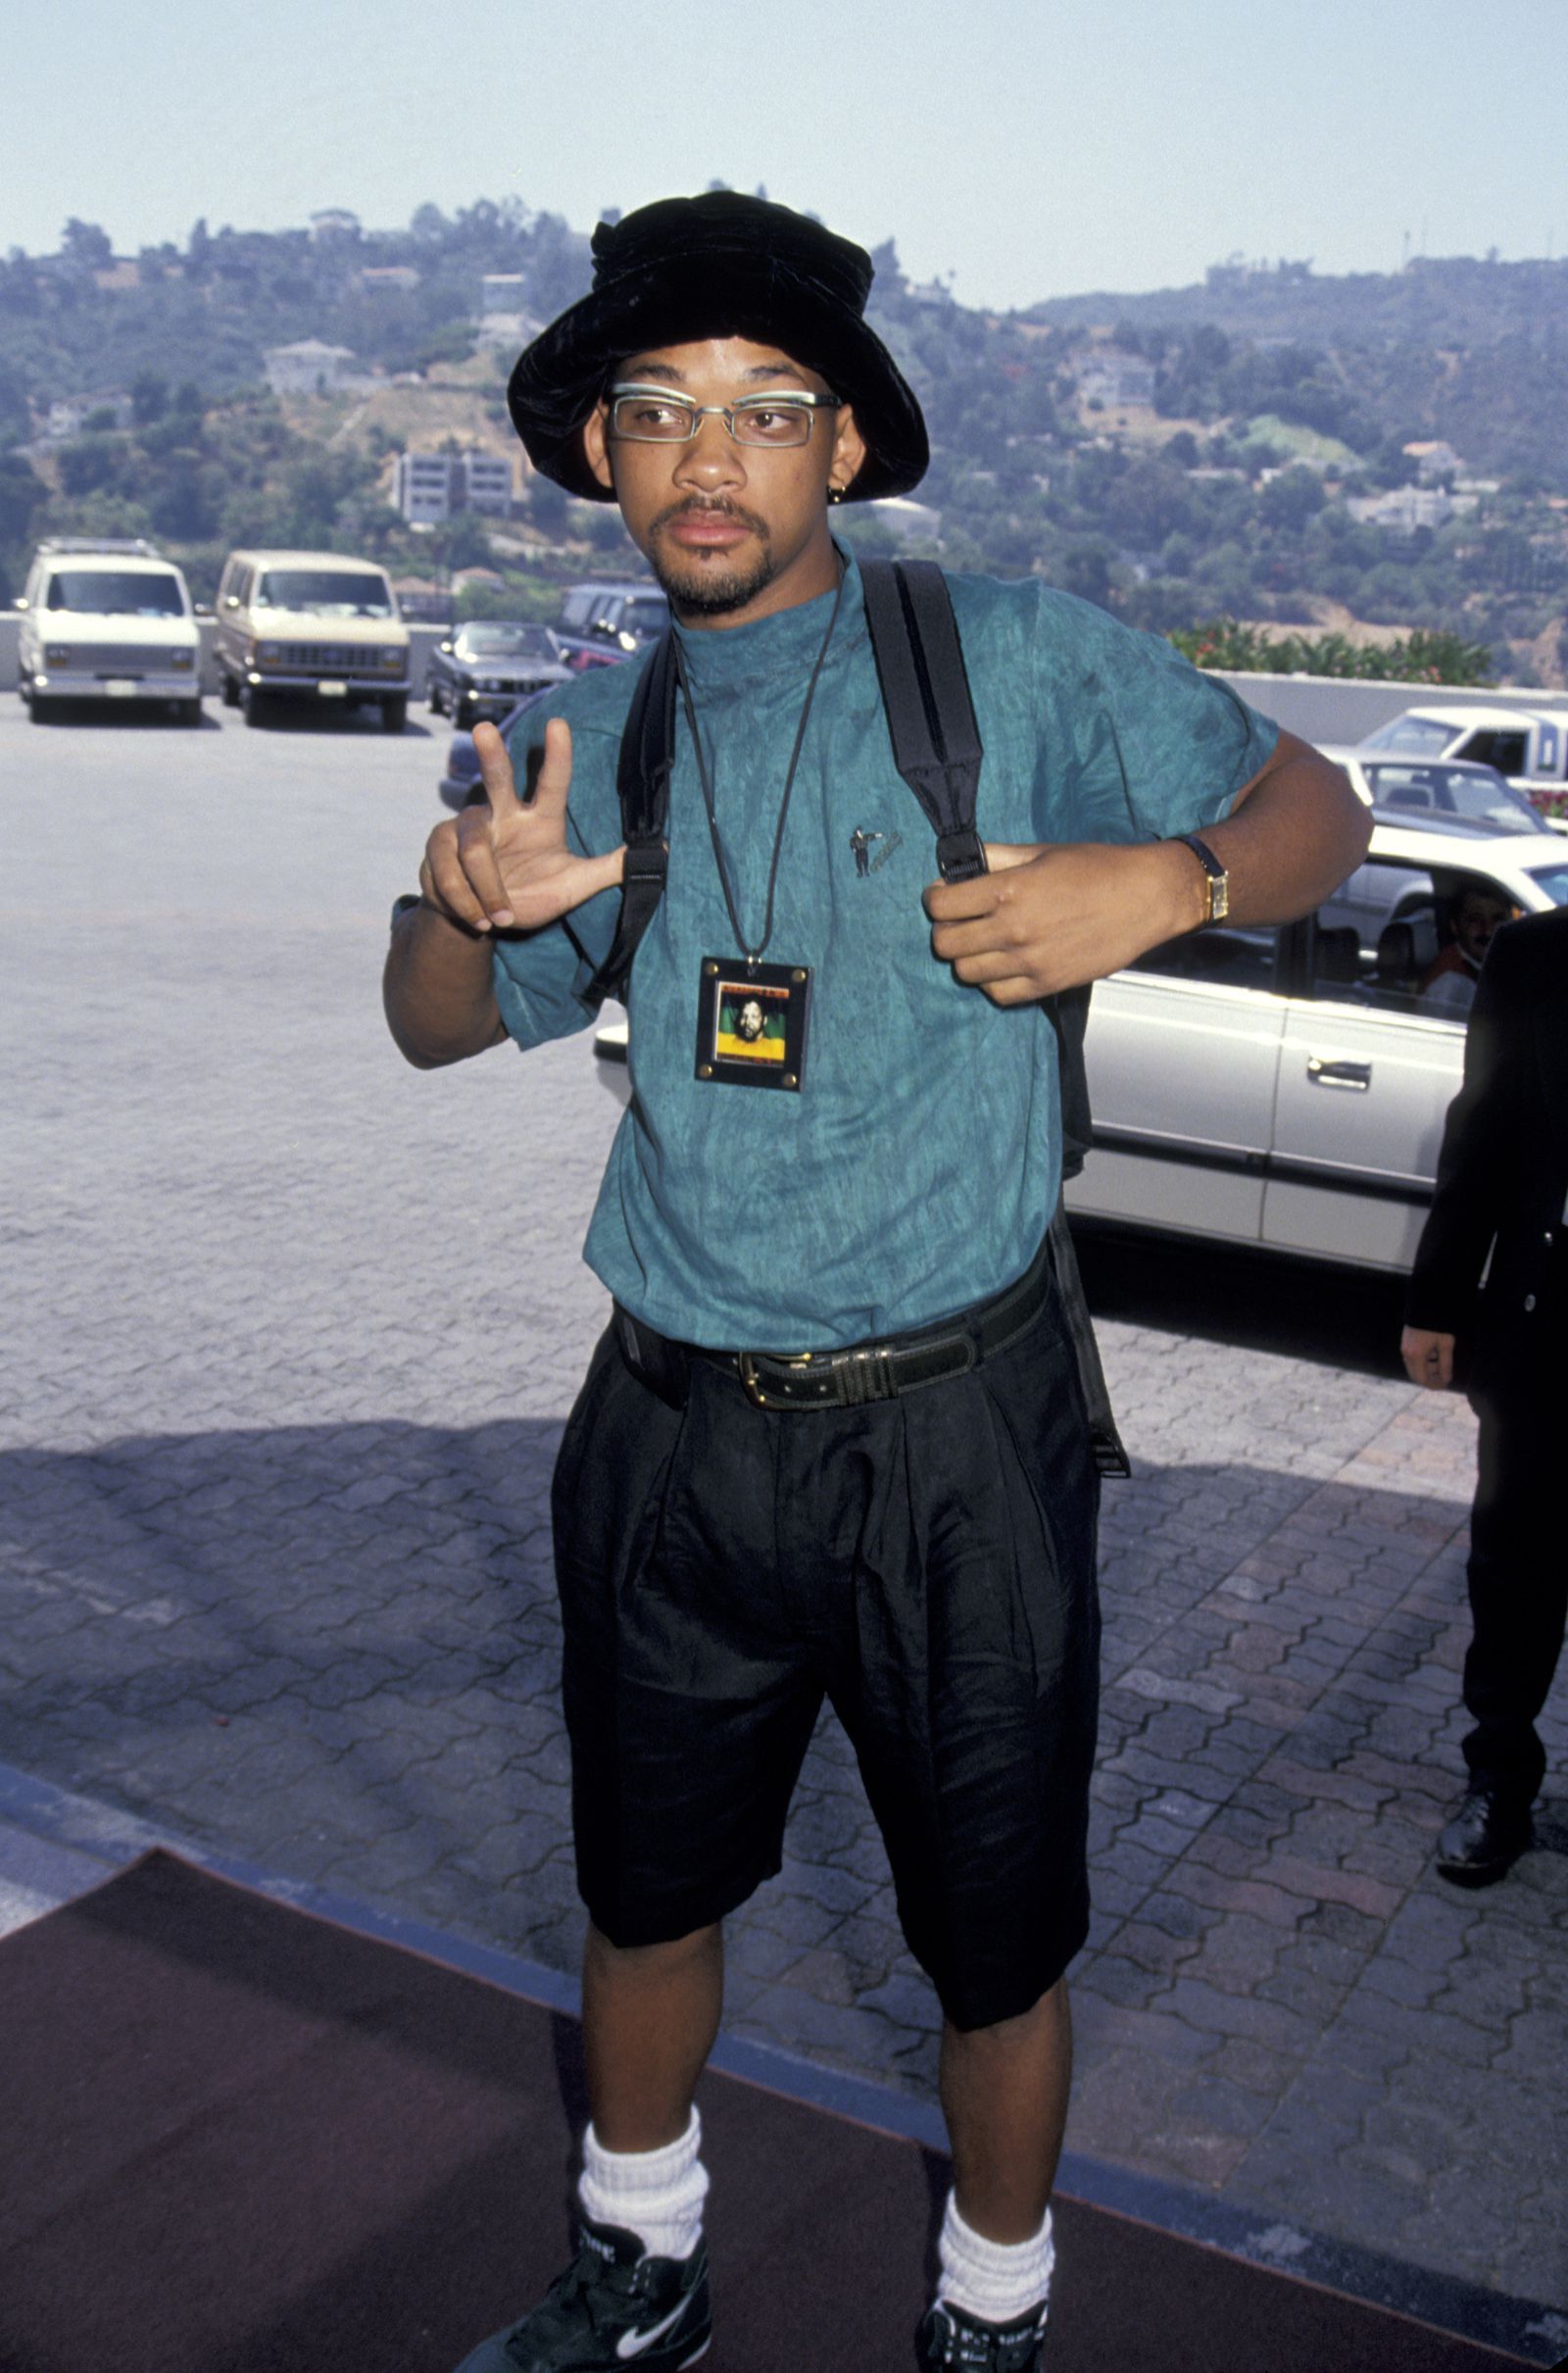 of the Best Paparazzi Moments from the '90ss hip hop